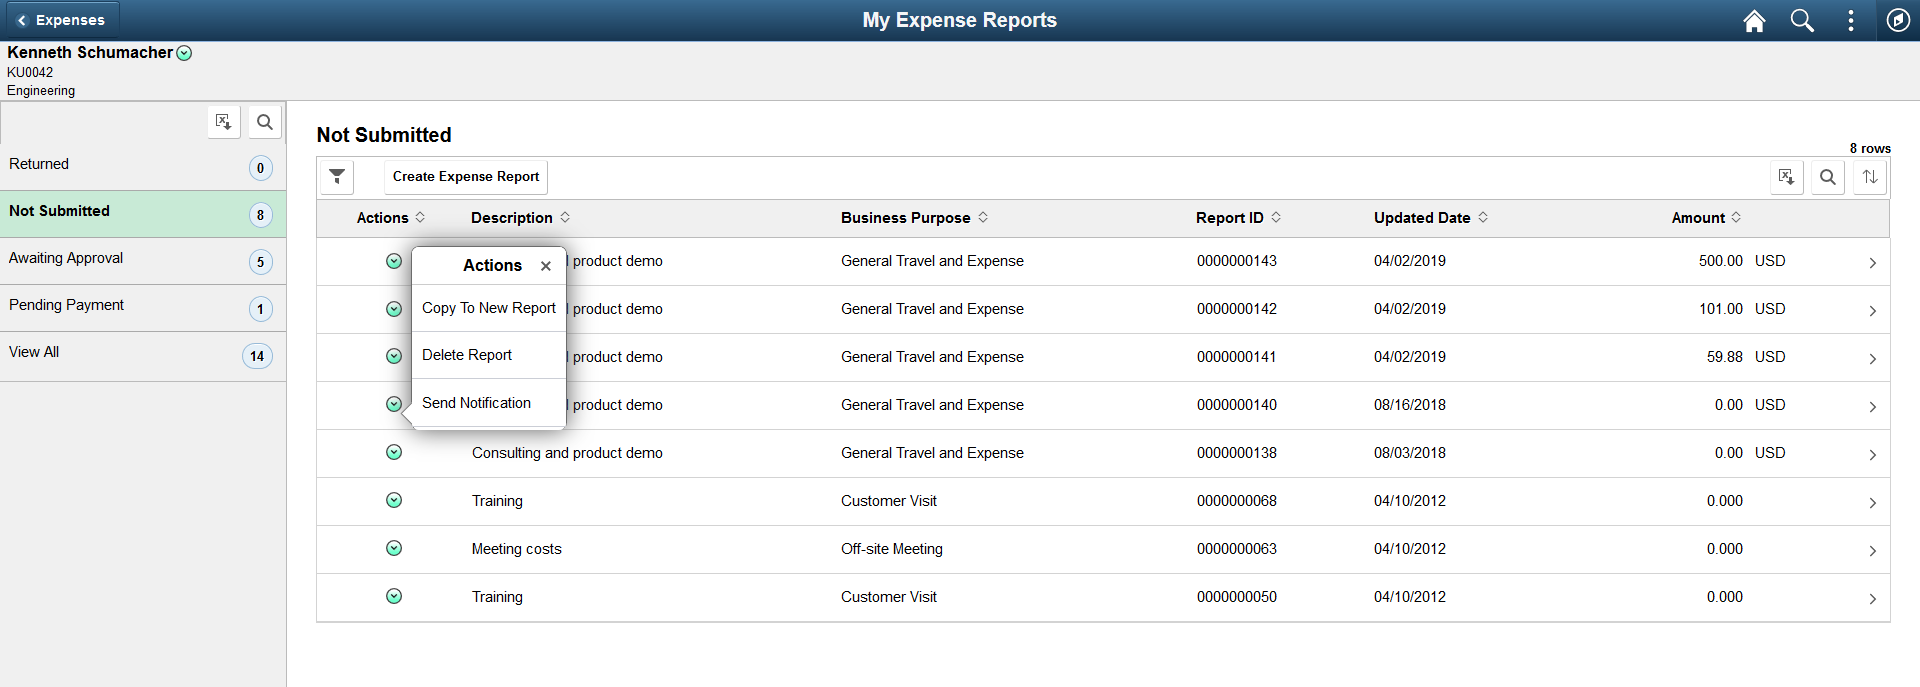 My Expense Report grid